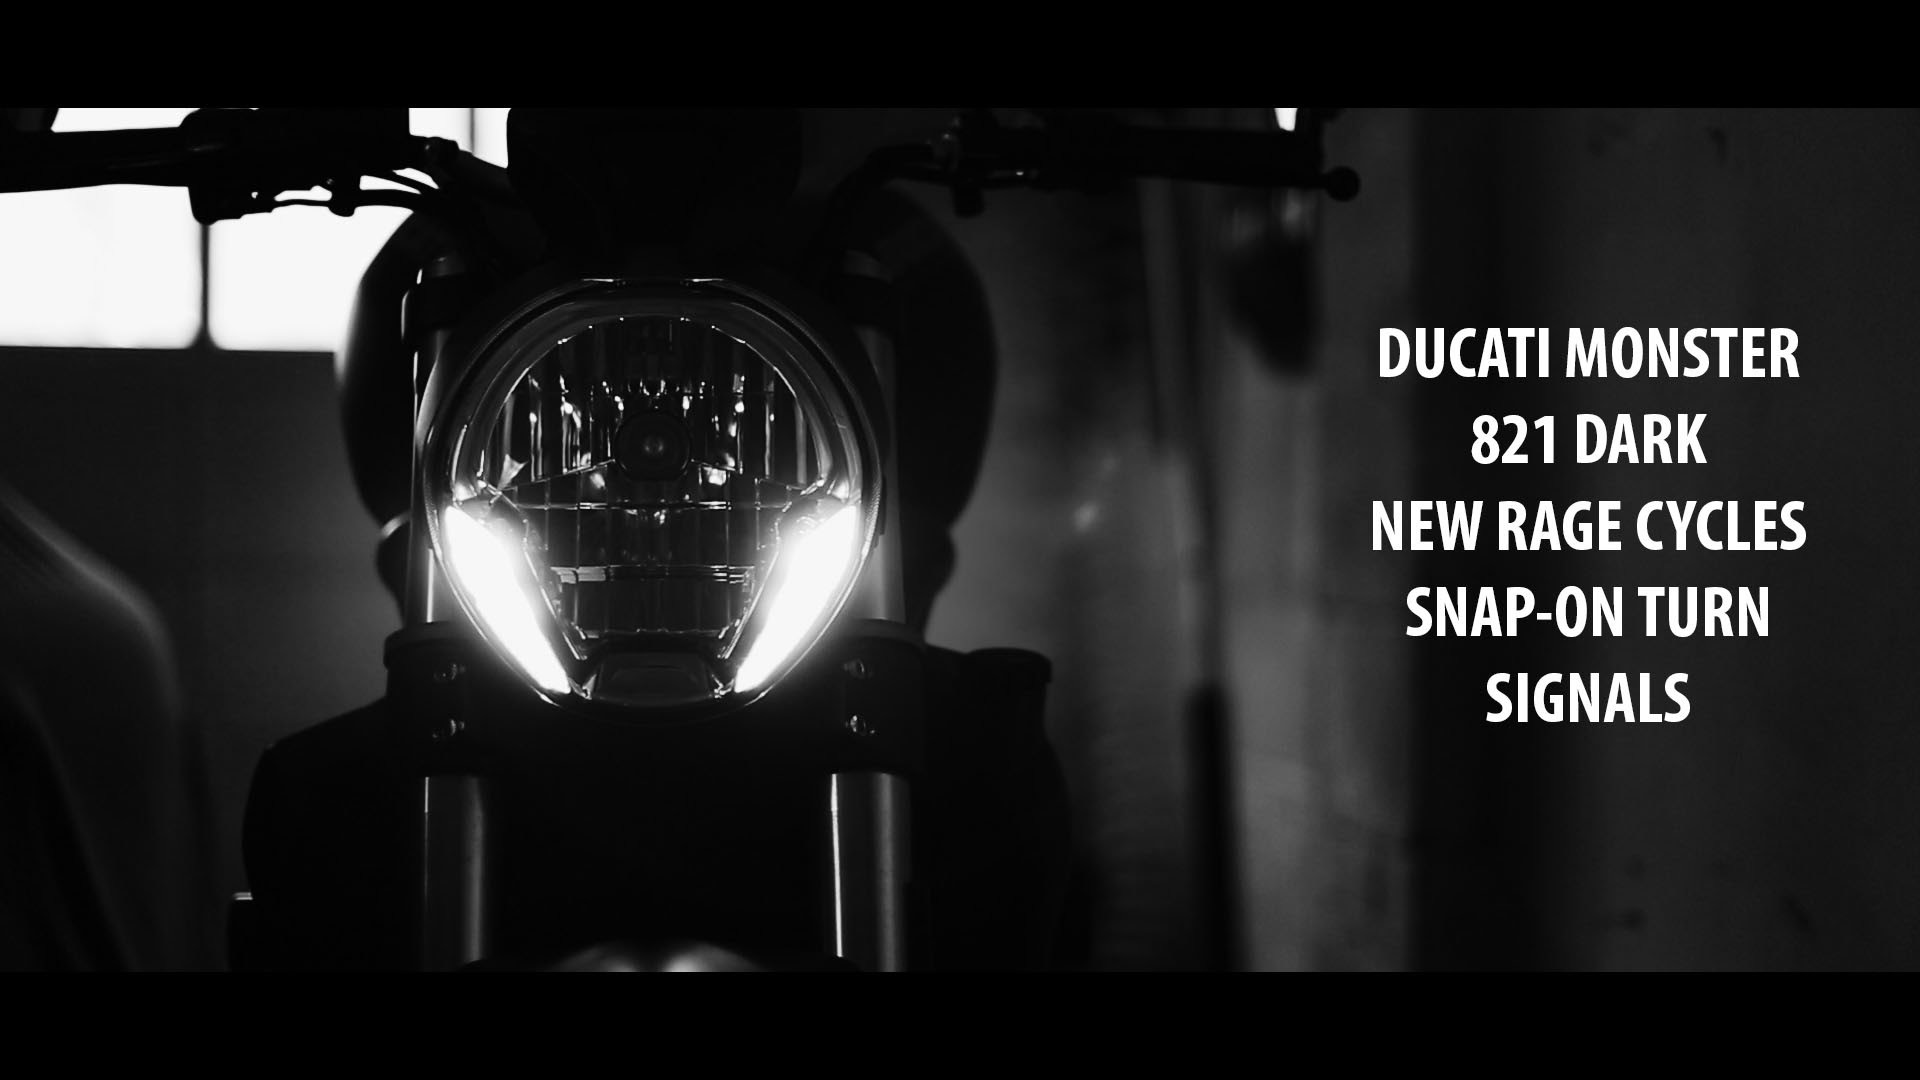 Ducati Monster 821 Dark New Rage Cycles Snap On Turn Signals